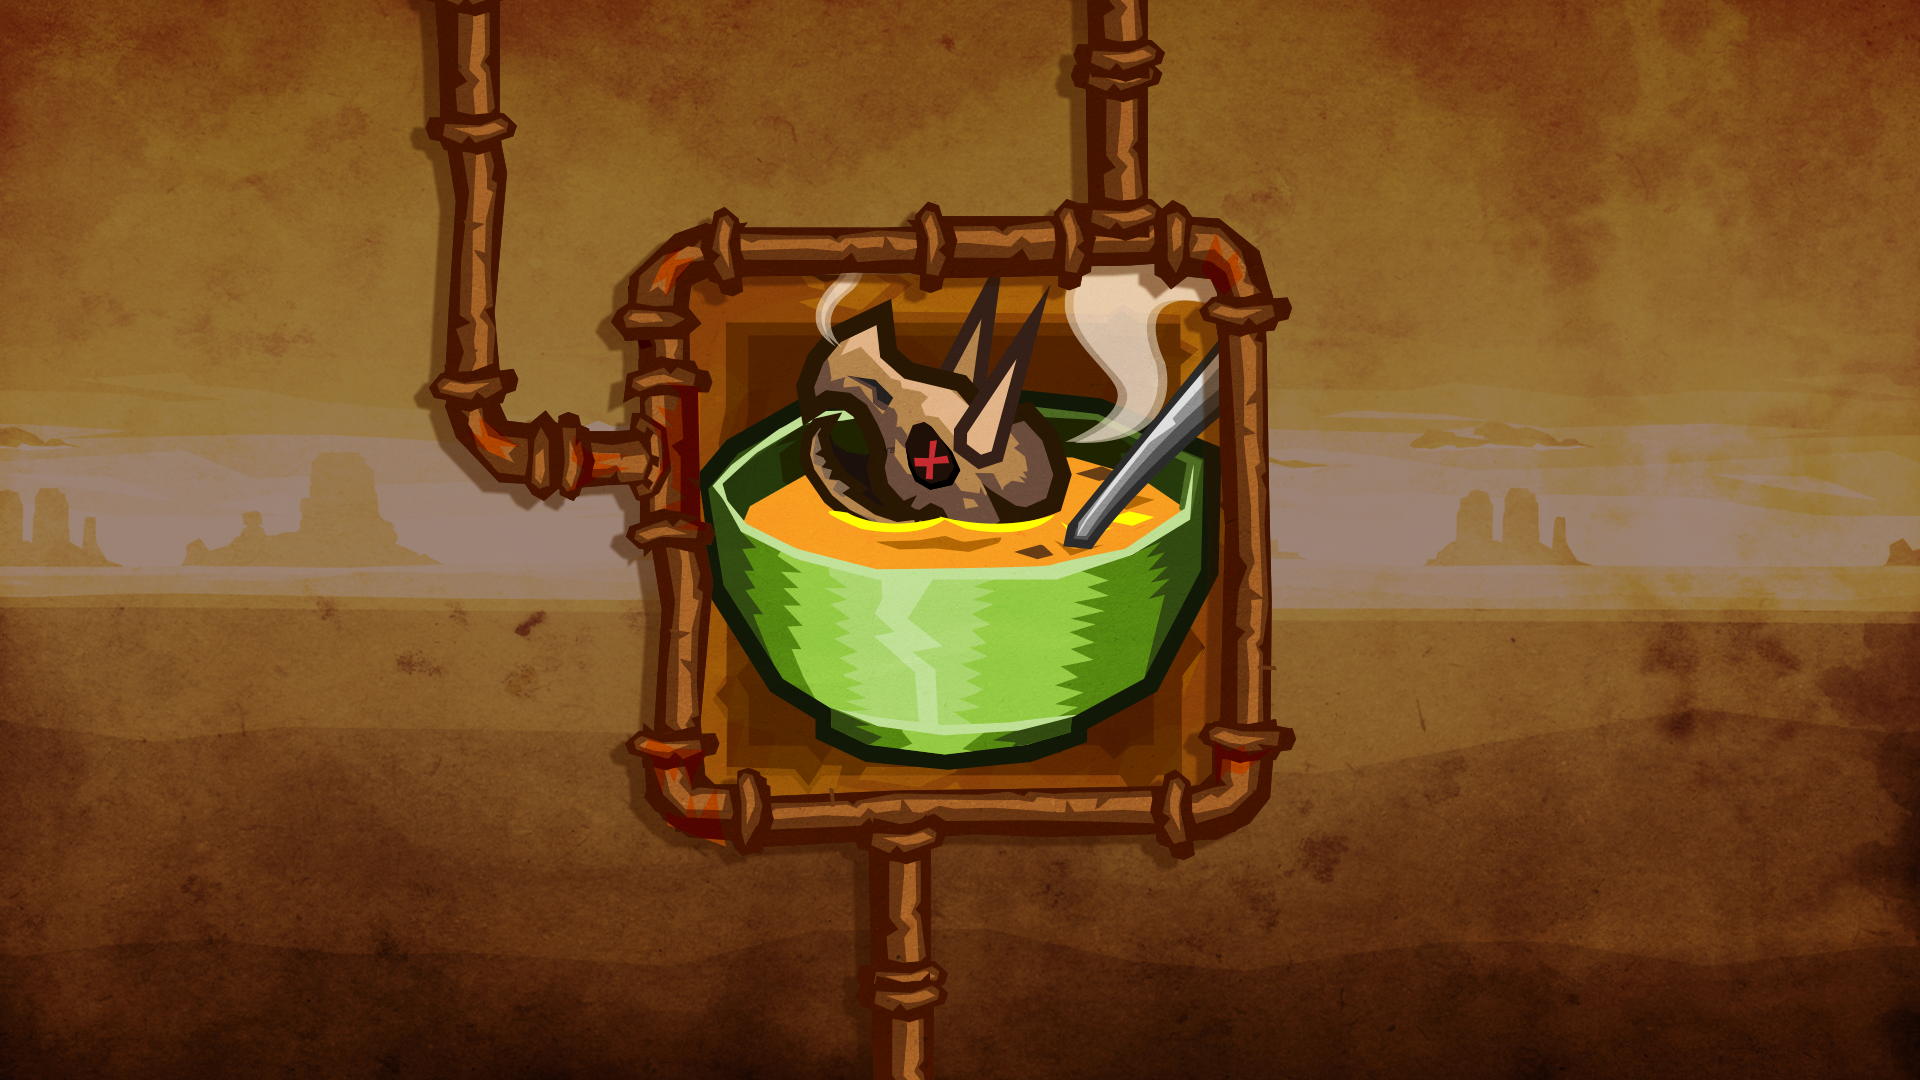 Icon for Turtle Soup, Yum!